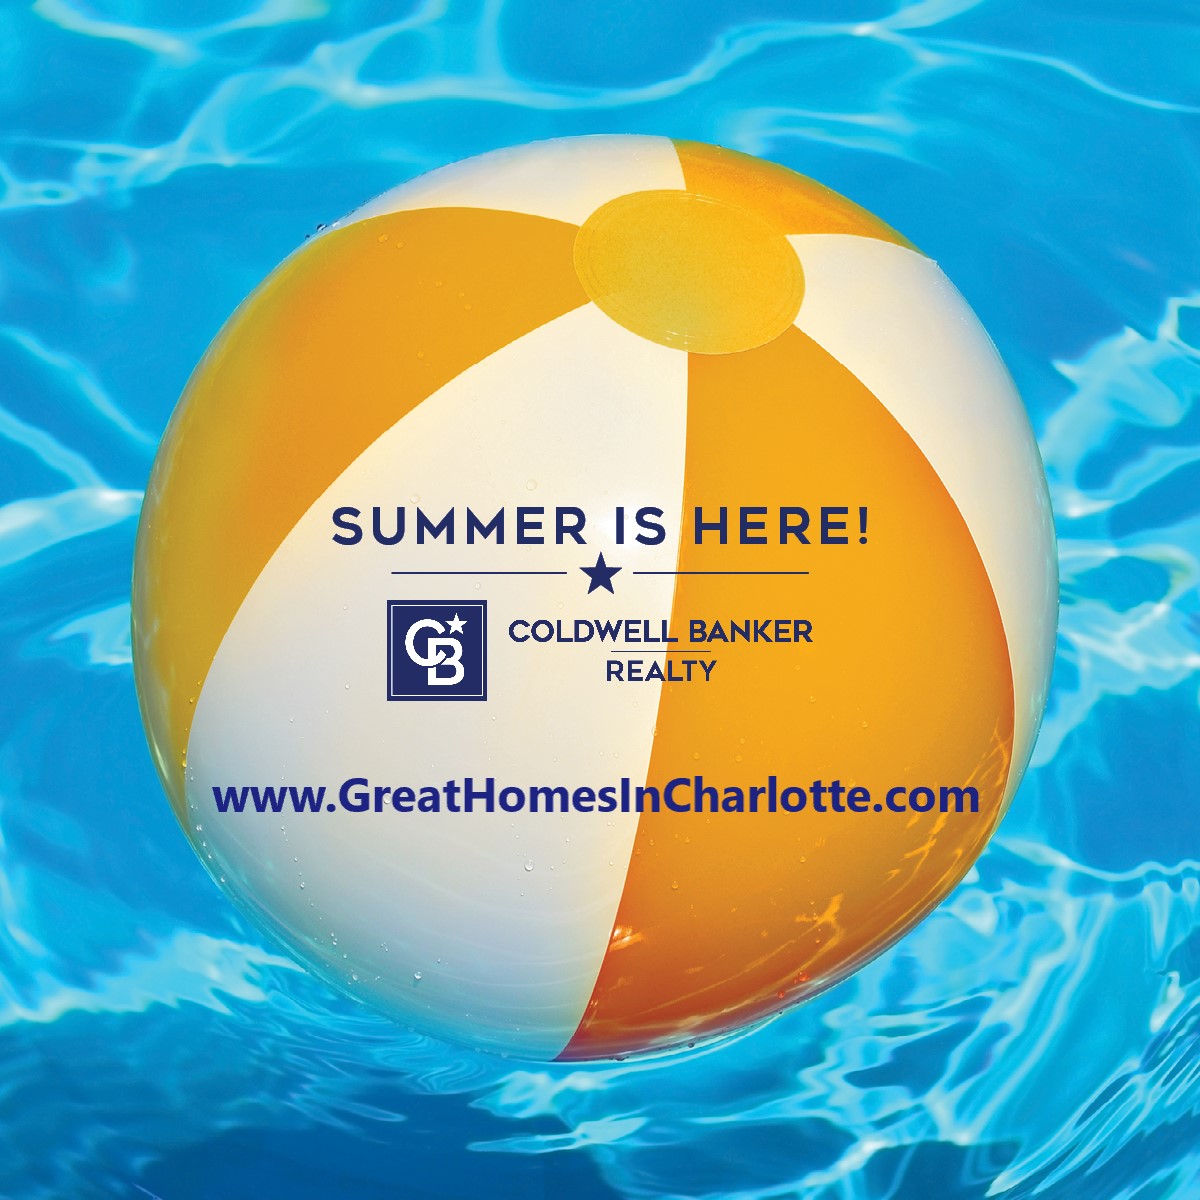 Home Buyer & Home Seller Guides For Summer 2021